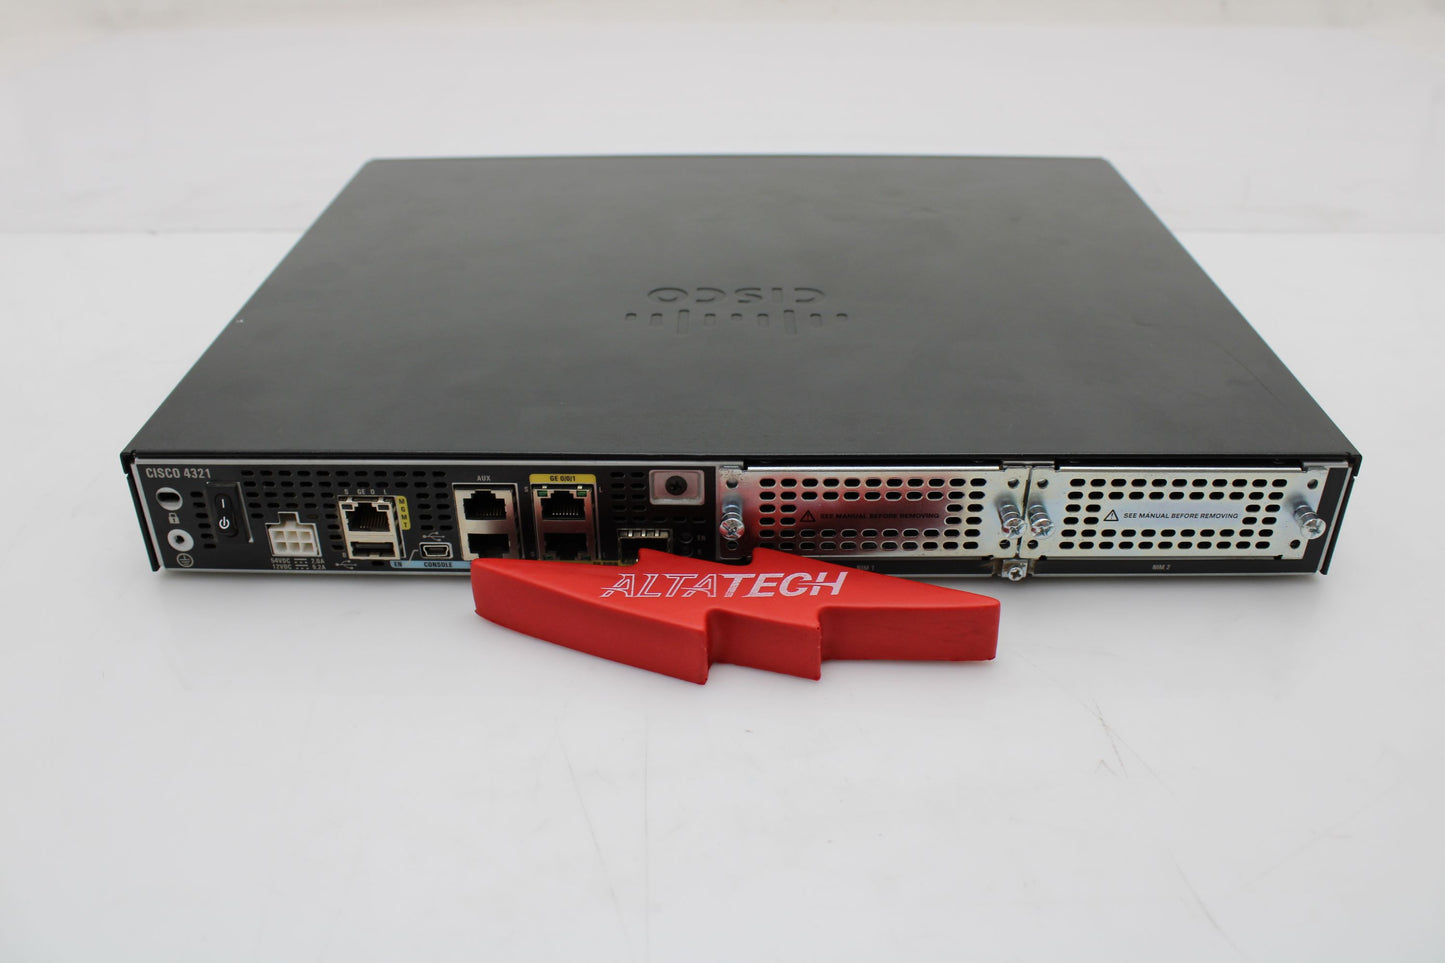 Cisco ISR4321-V/K9 Cisco ISR4321-V/K9 (2GE,2NIM,4G FLASH,4G DRAM,Voice Bundle) Router, Used